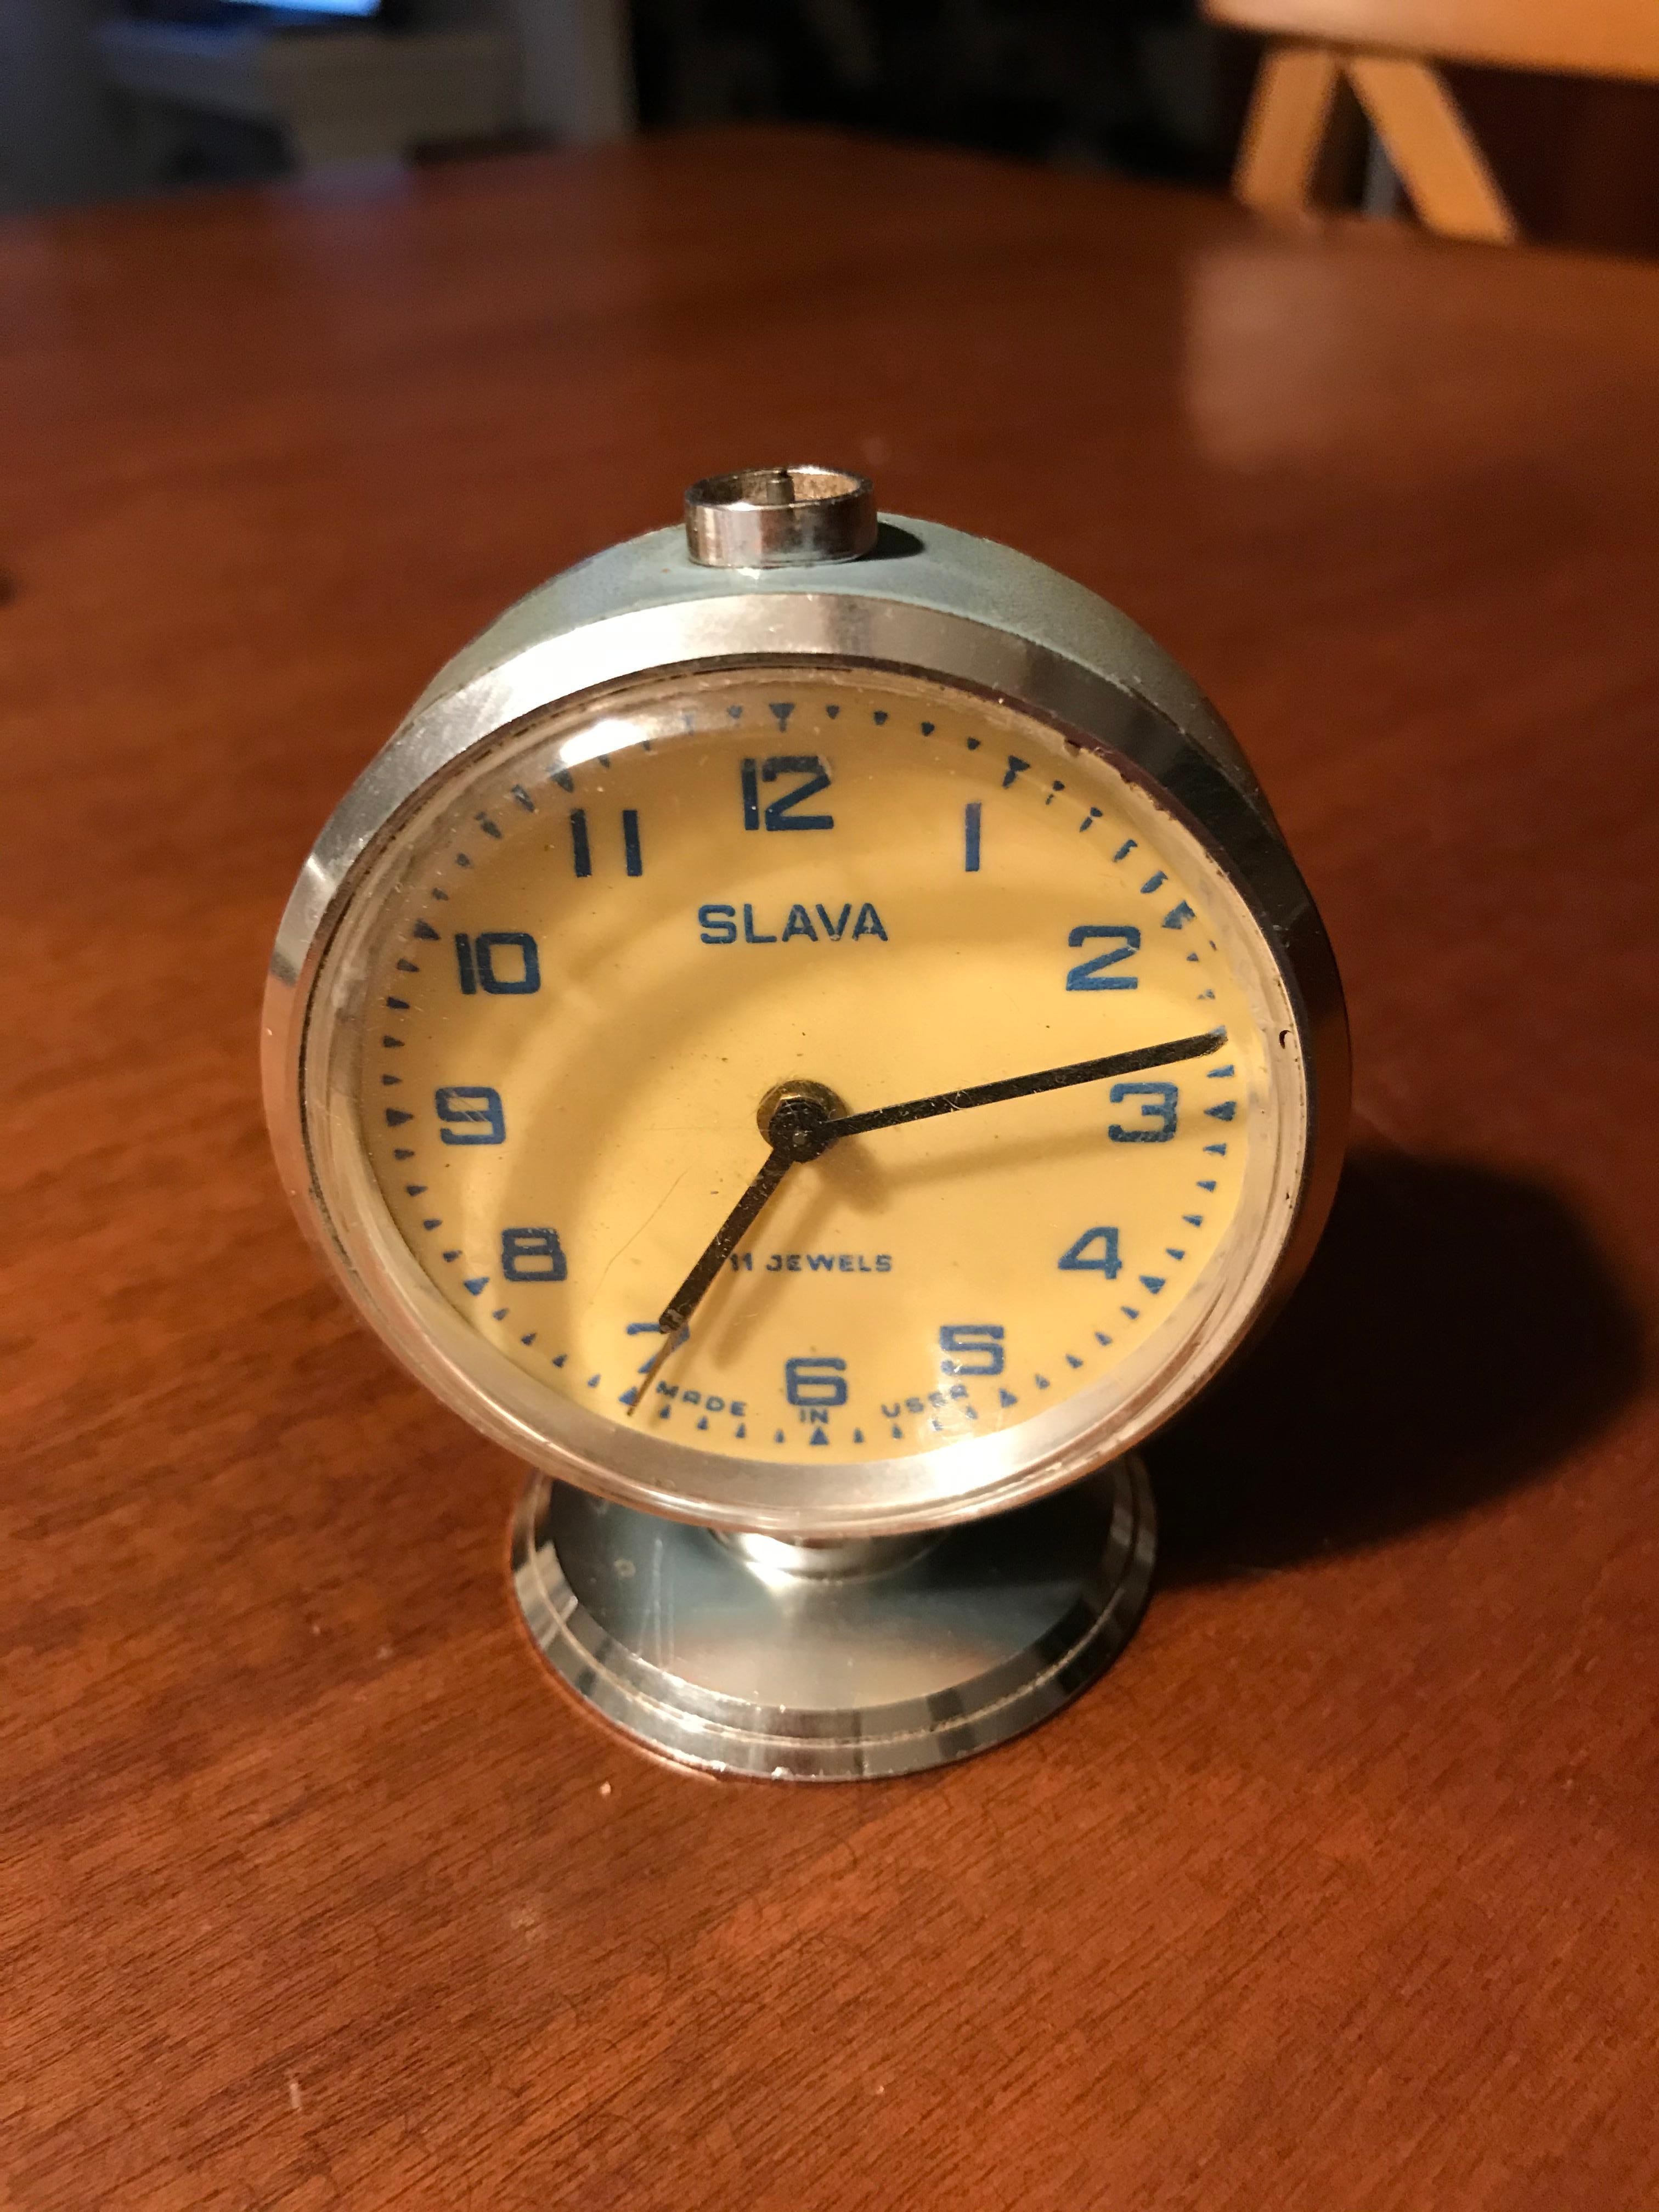 Vintage alarm desk table clock Slava 1980s, from Russia / Soviet Union / USSR
Measures: Length (Depth) 1.97 in
Width 2.56 in
Height 3.15 in.